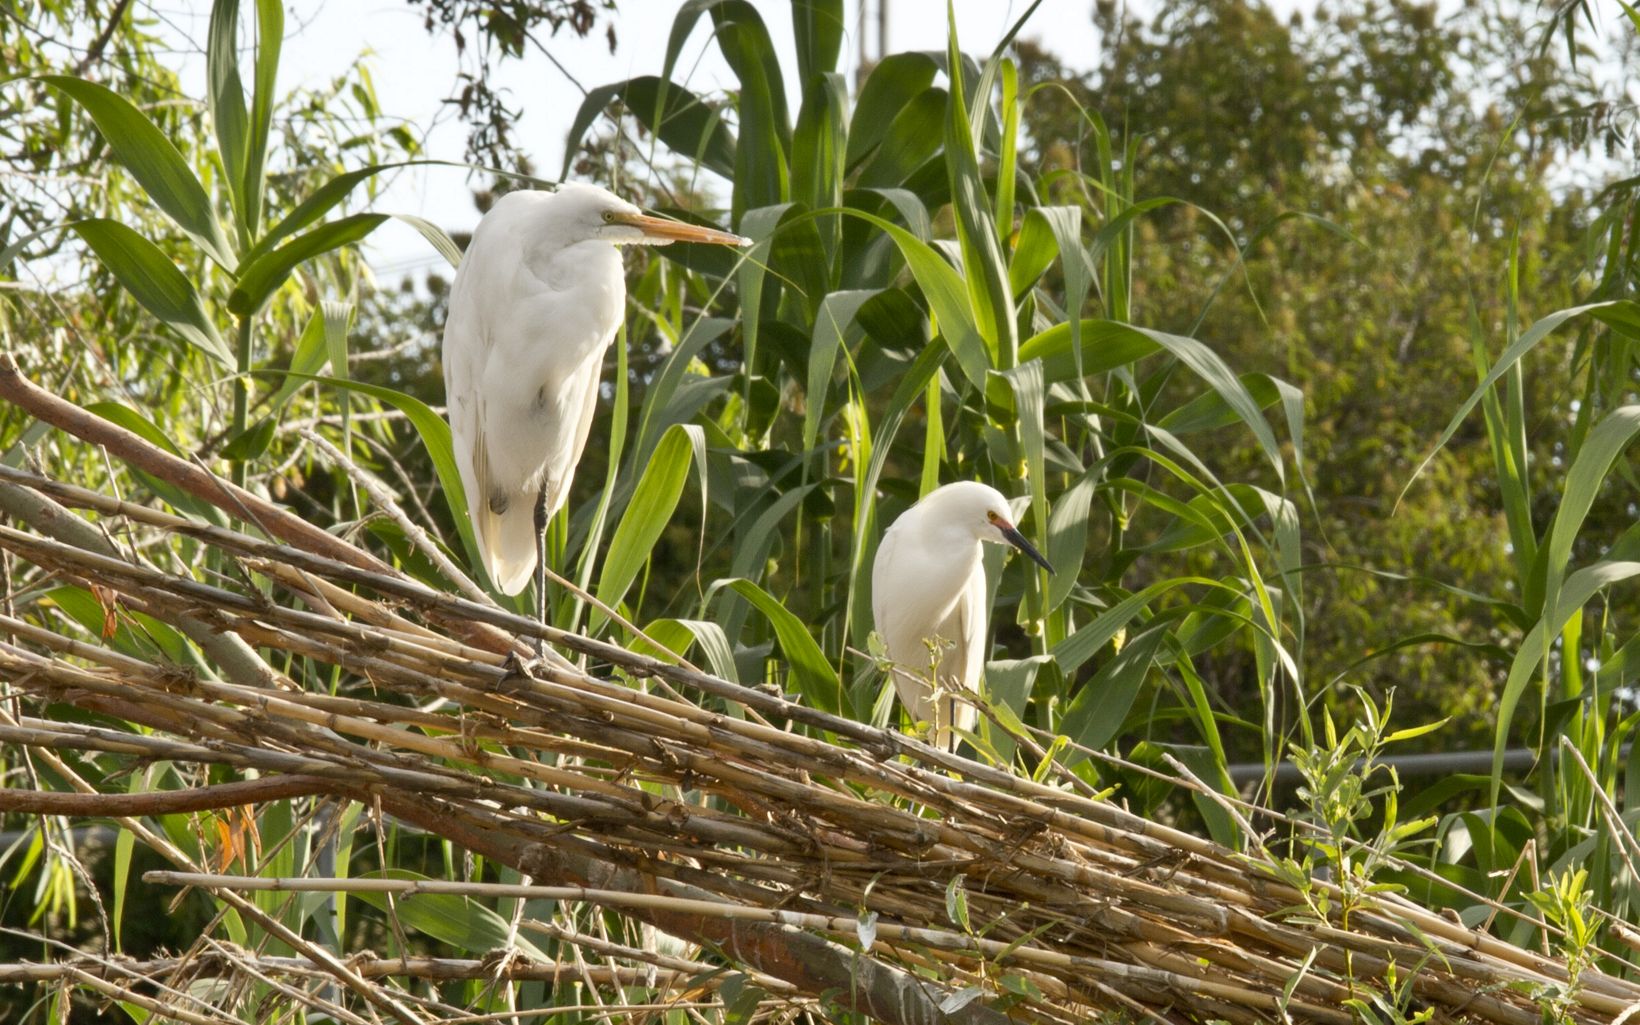 Egrets sitting on a branch.